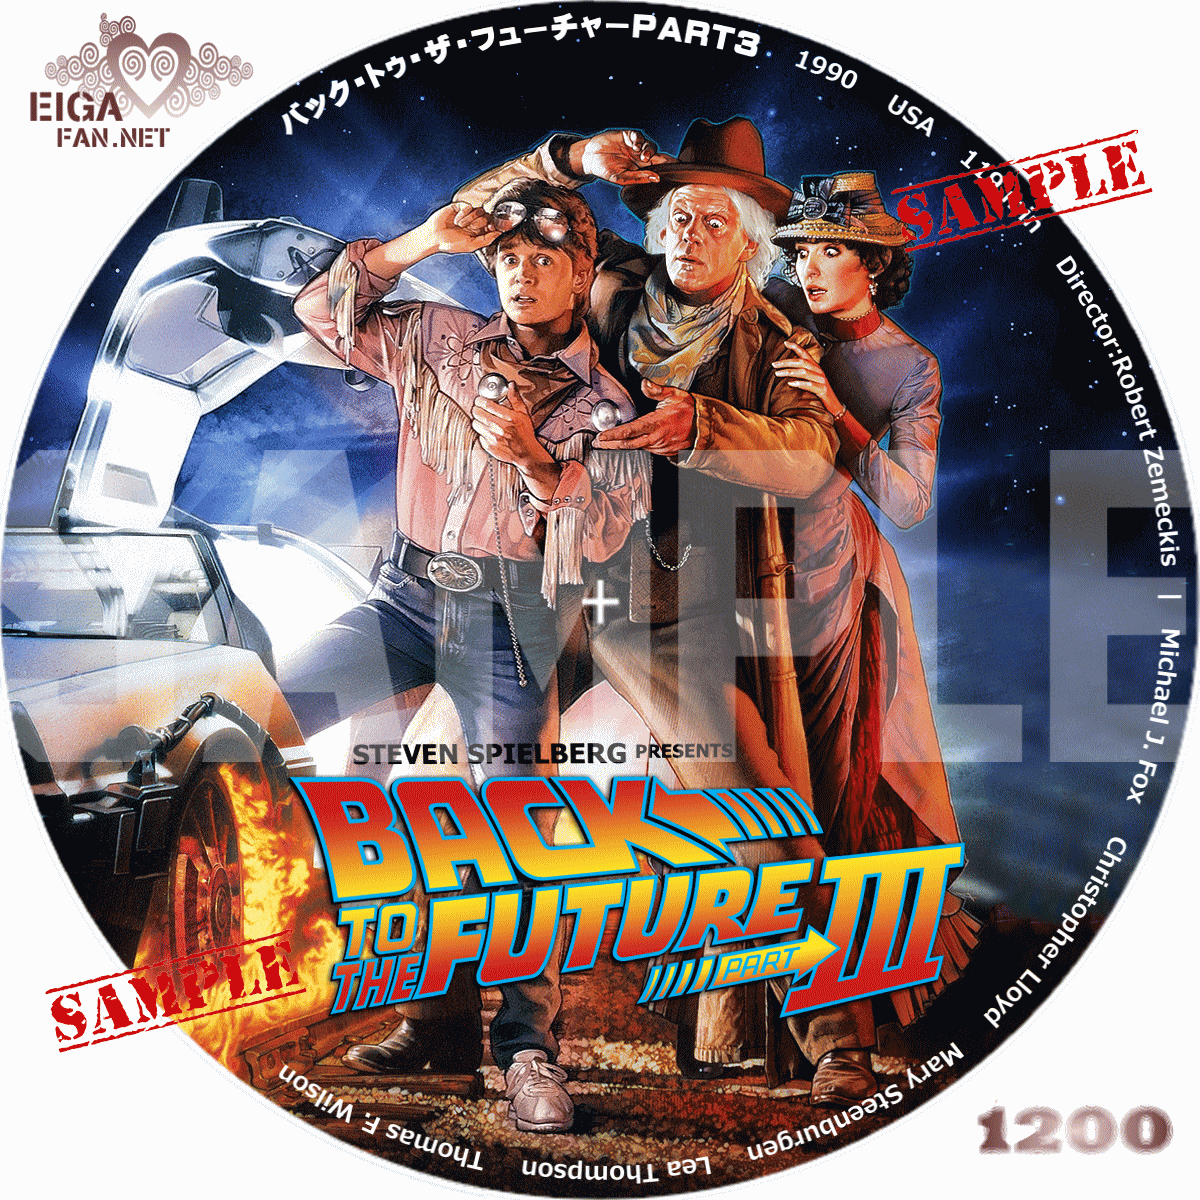 【DVDラベル】バック・トゥ・ザ・フューチャーPART3／BACK TO THE FUTURE PART III (1990)